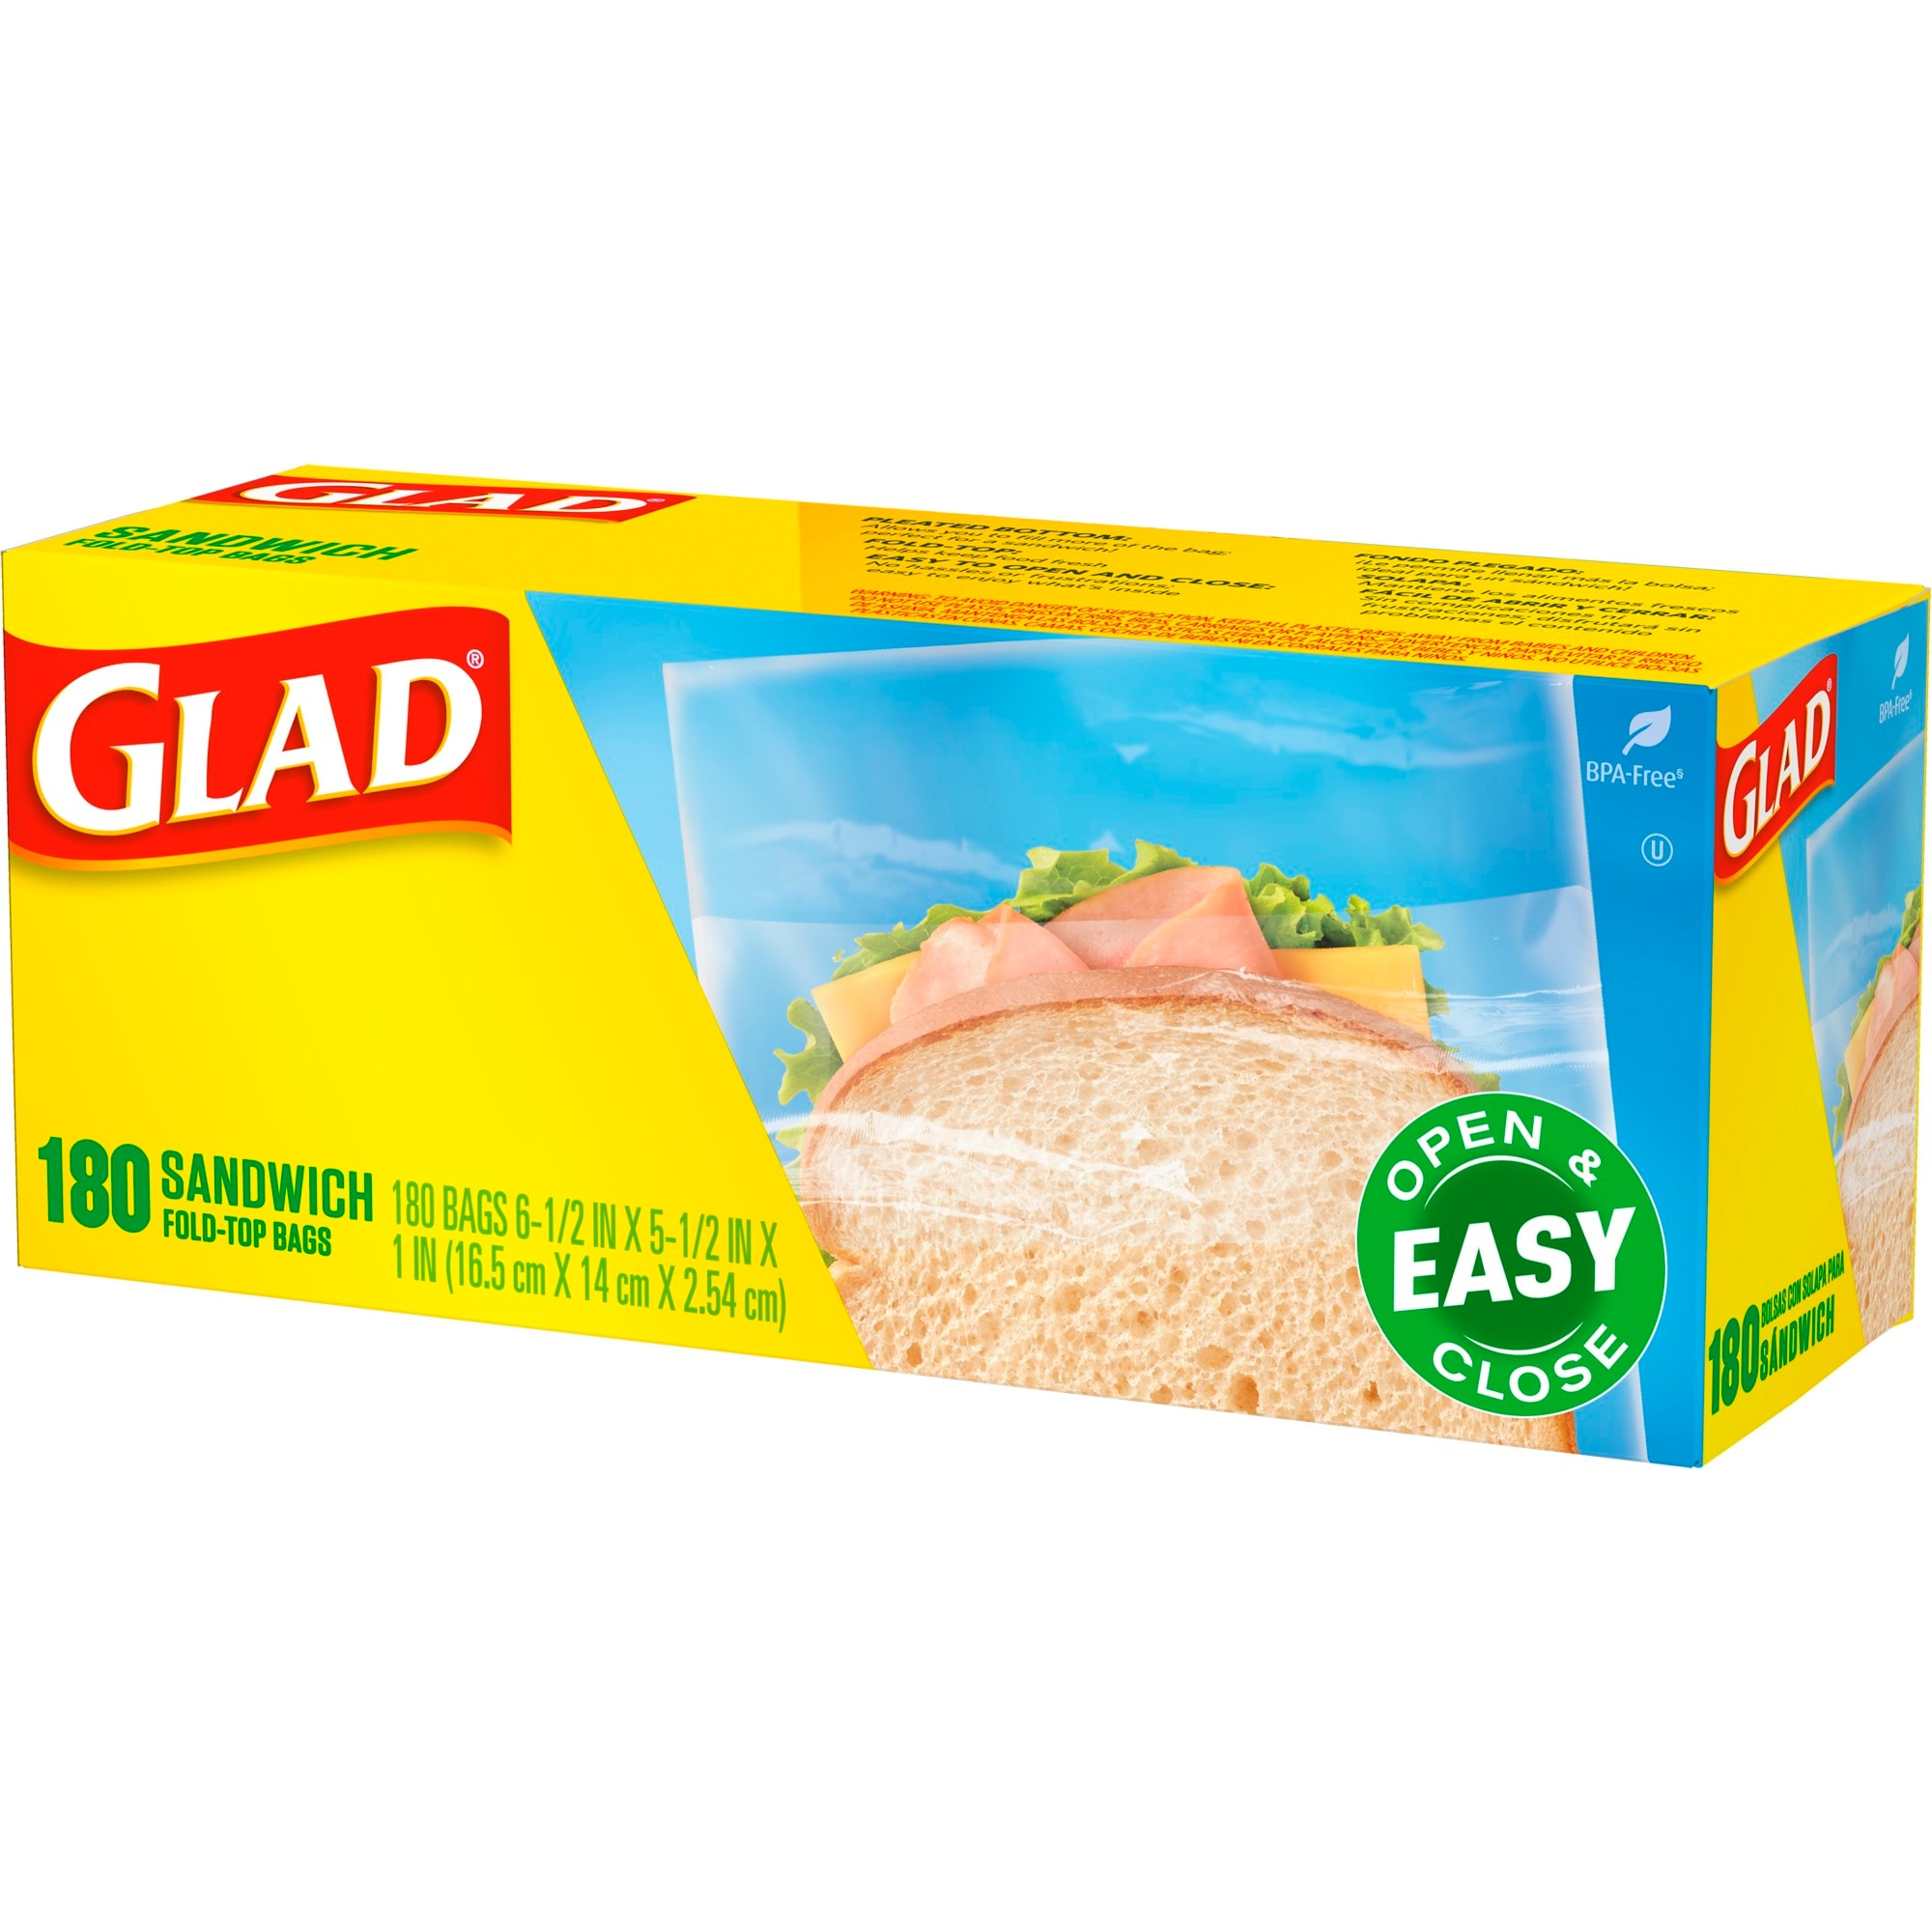 Glad Food Storage and Freezer 2 in 1 Zipper Bags - Quart Size.